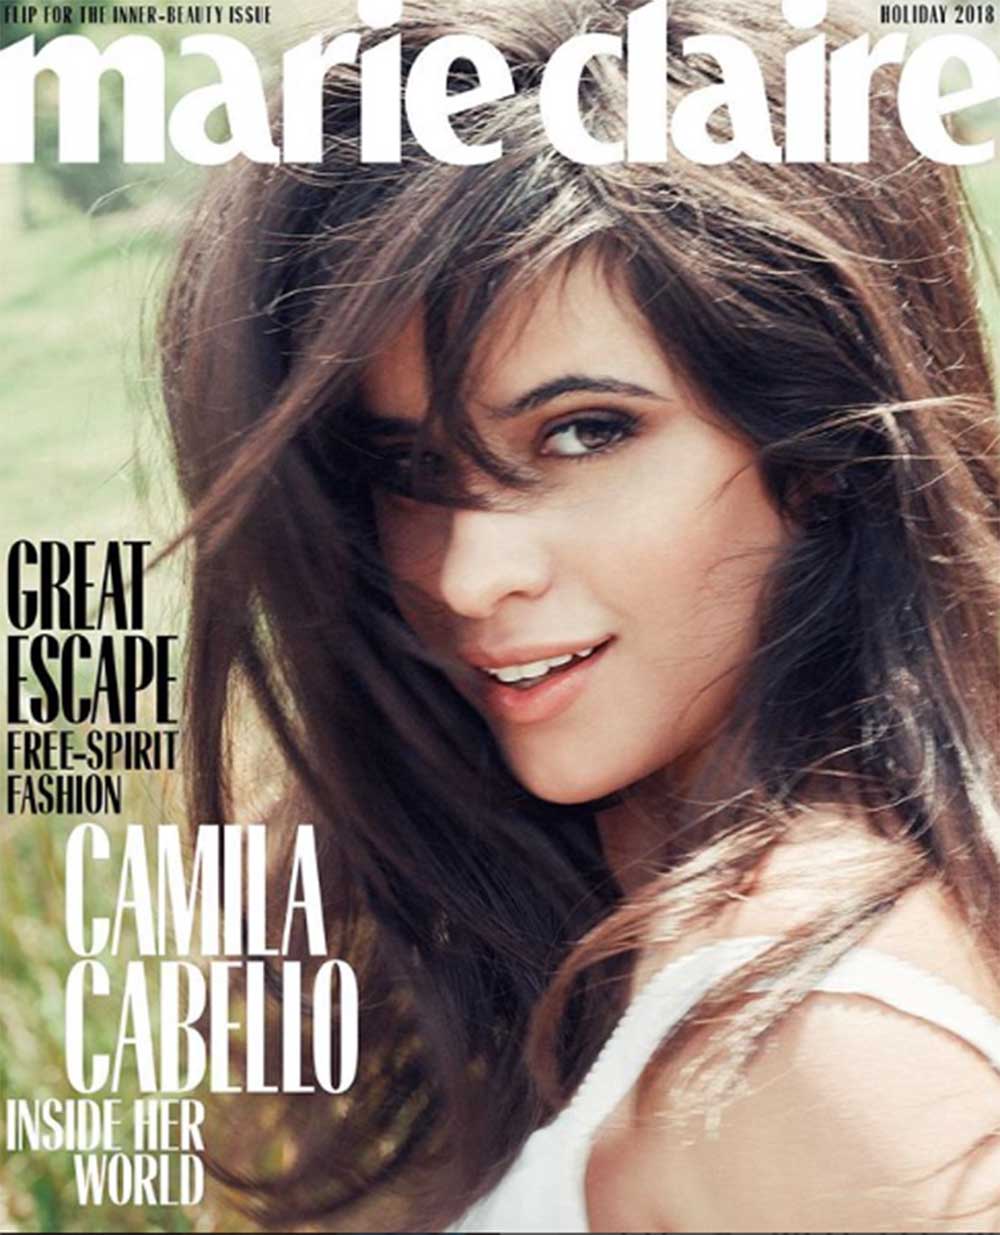 『Marie Claire』の表紙を飾ったカミラ・カベロ（画像は『camila　2018年11月14日付Instagram「thank you ＠marieclairemag」』のスクリーンショット）